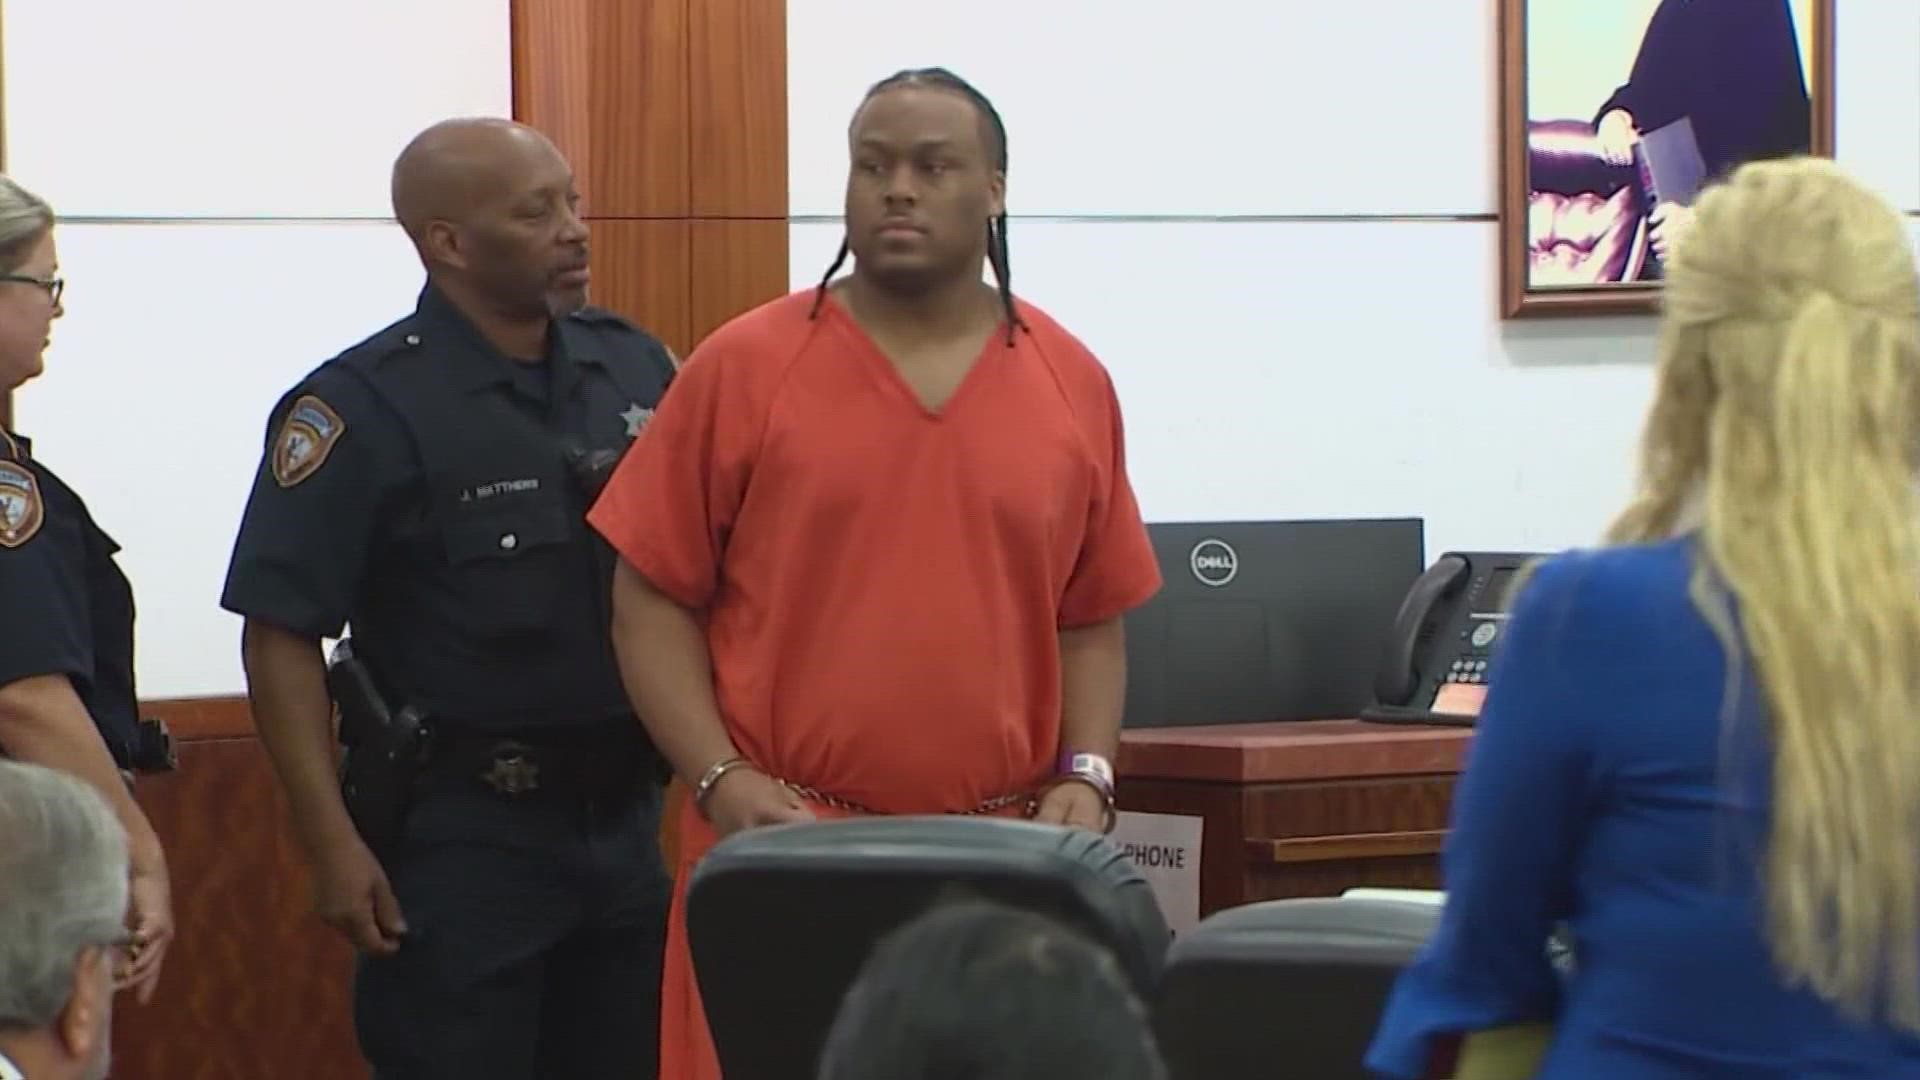 Patrick Xavier Clark, the man accused of shooting and killing Migos rapper TakeOff, is due in court on Wednesday.